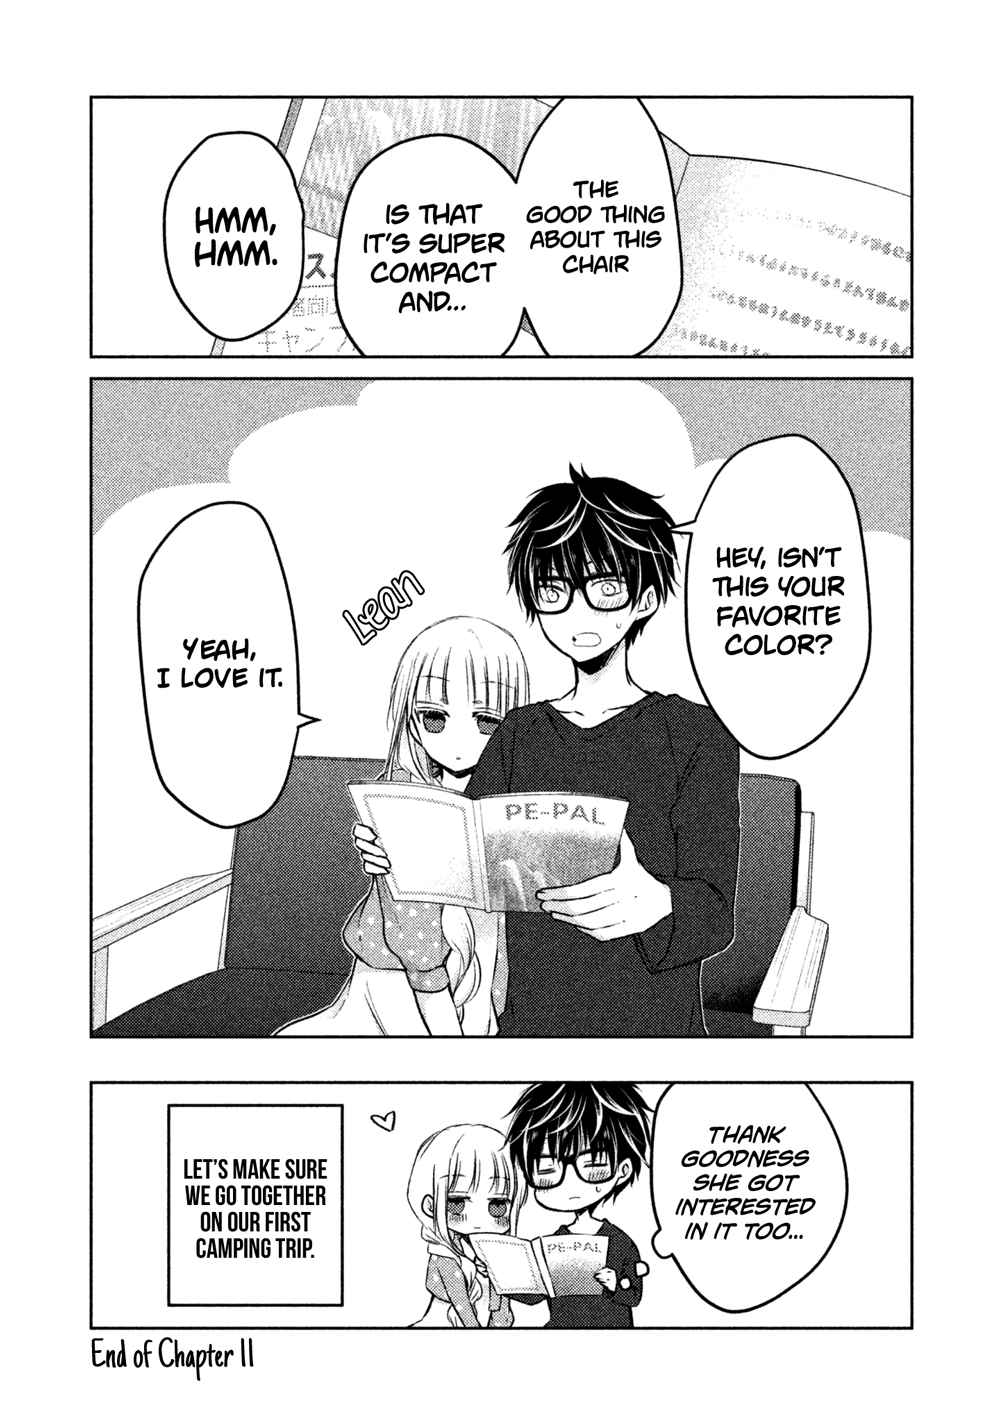 We May Be An Inexperienced Couple But... Vol. 2 Ch. 11 Husband’s Secret